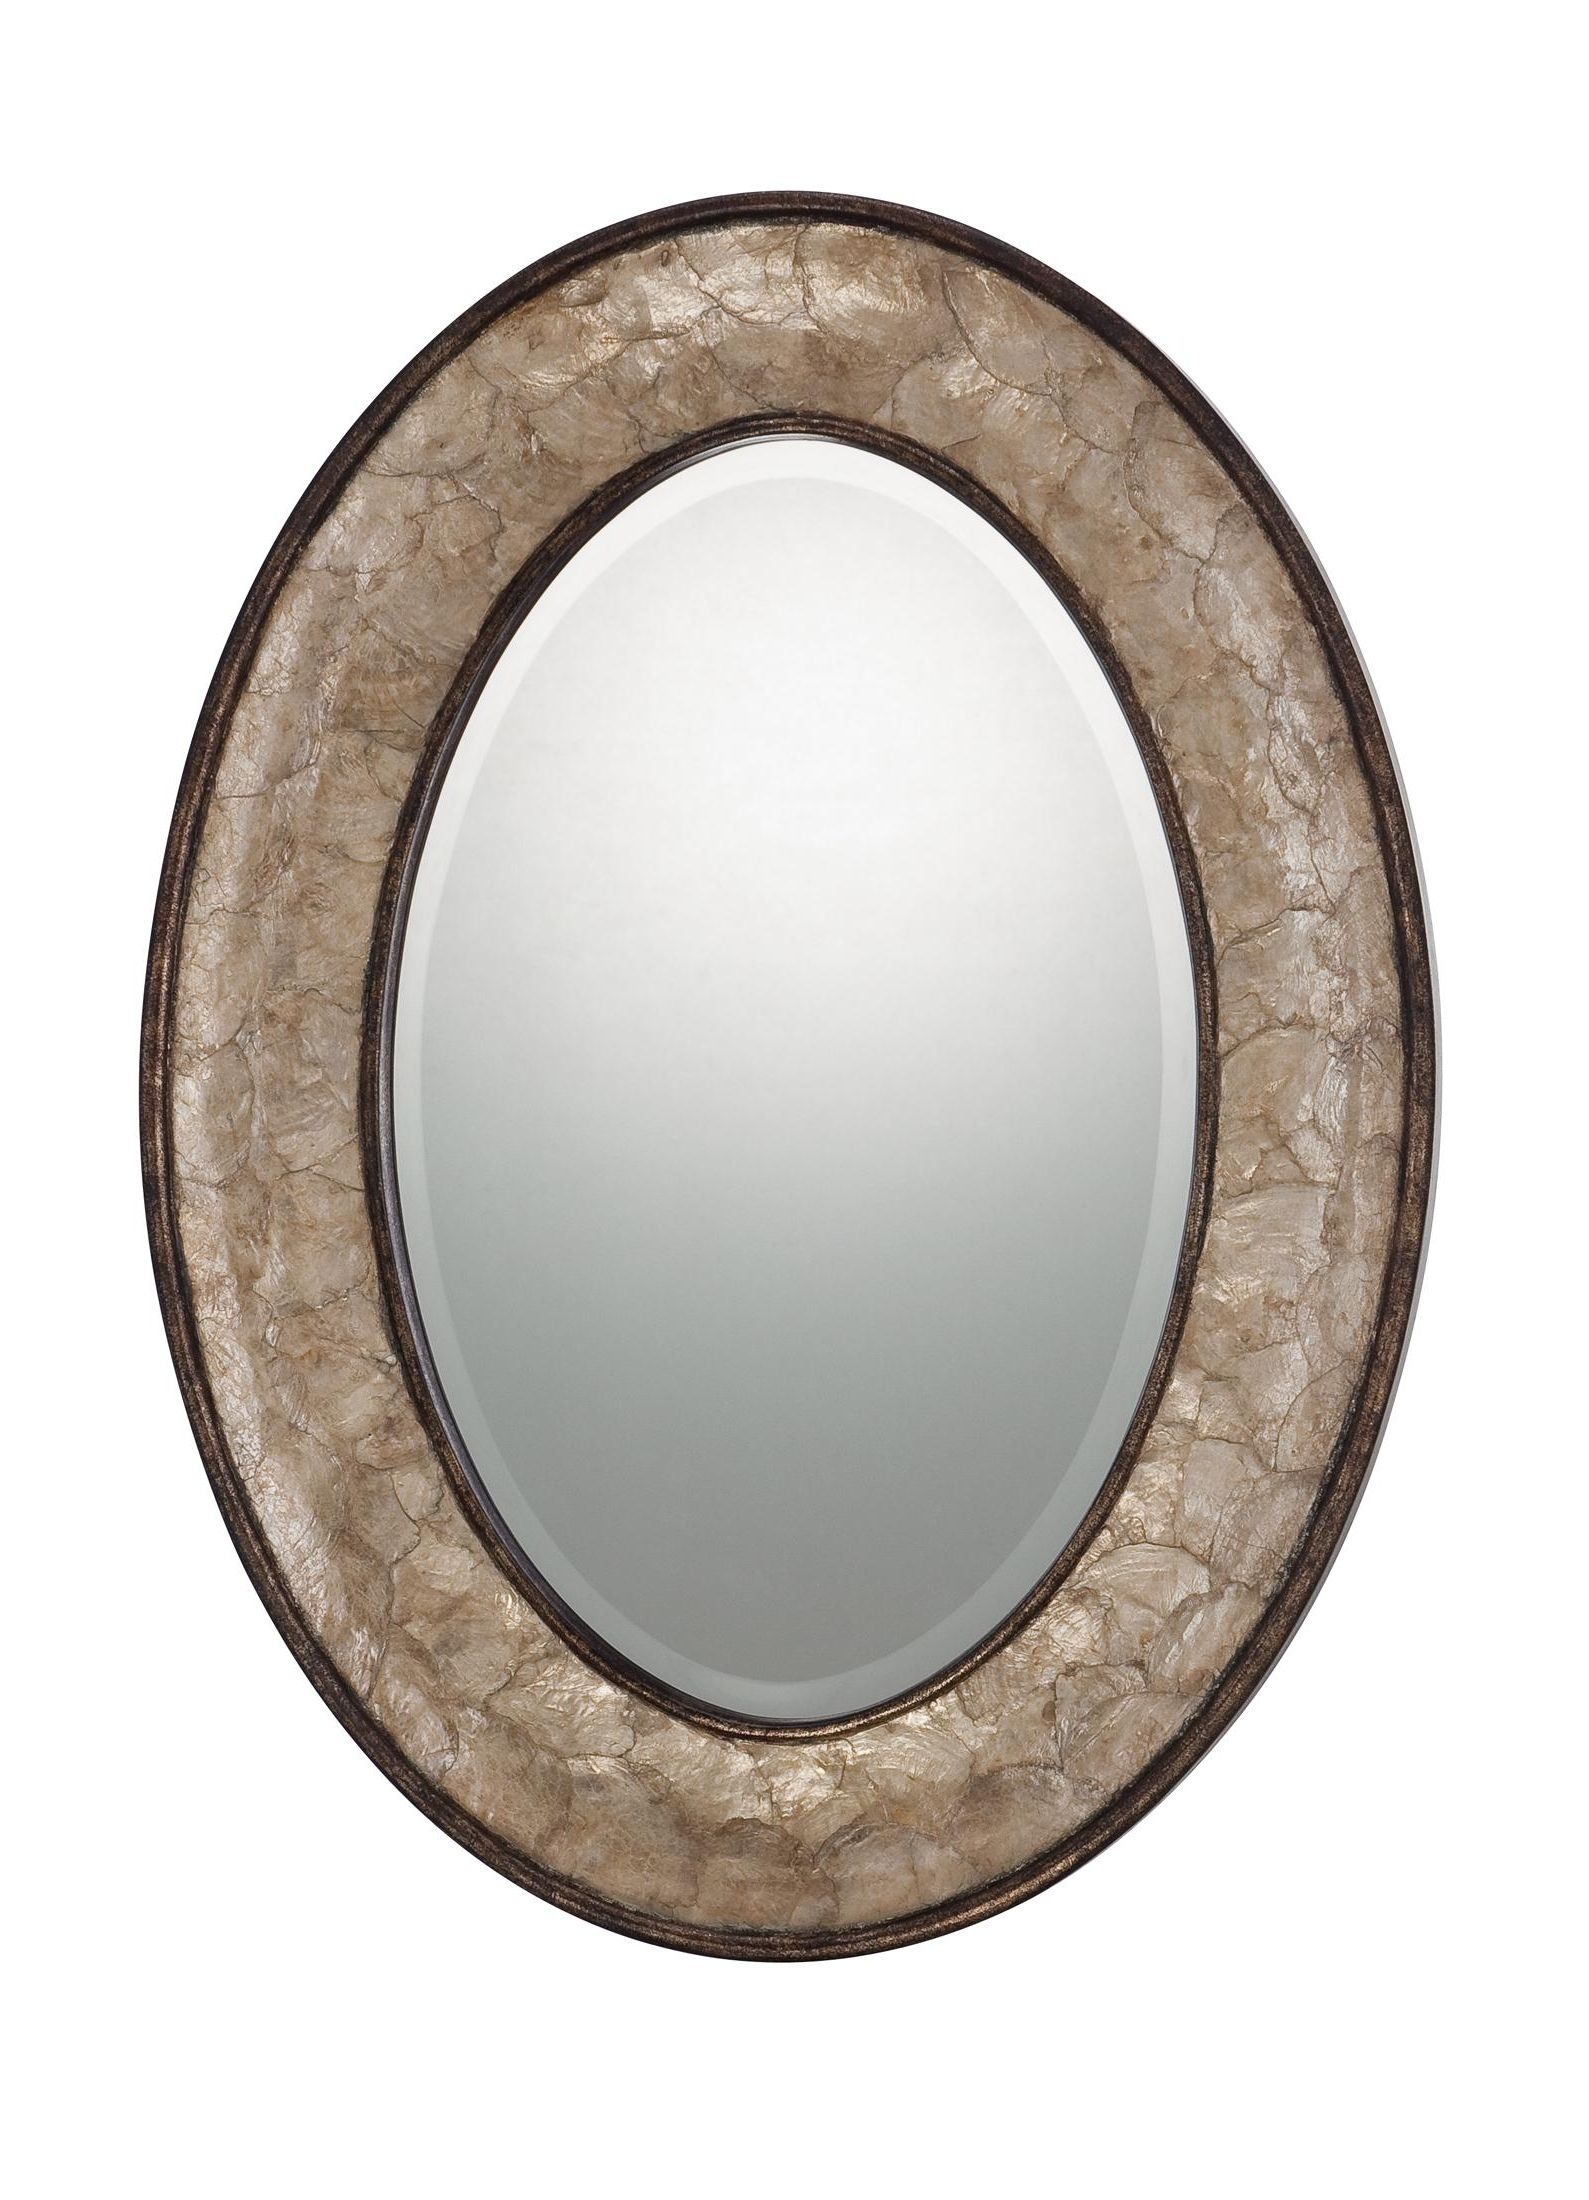 Quoizel Qr11681 Sloan 30 Oval Wall Mirror In Gold Tones Oval With Regard To Popular Oval Bathroom Wall Mirrors (View 17 of 20)